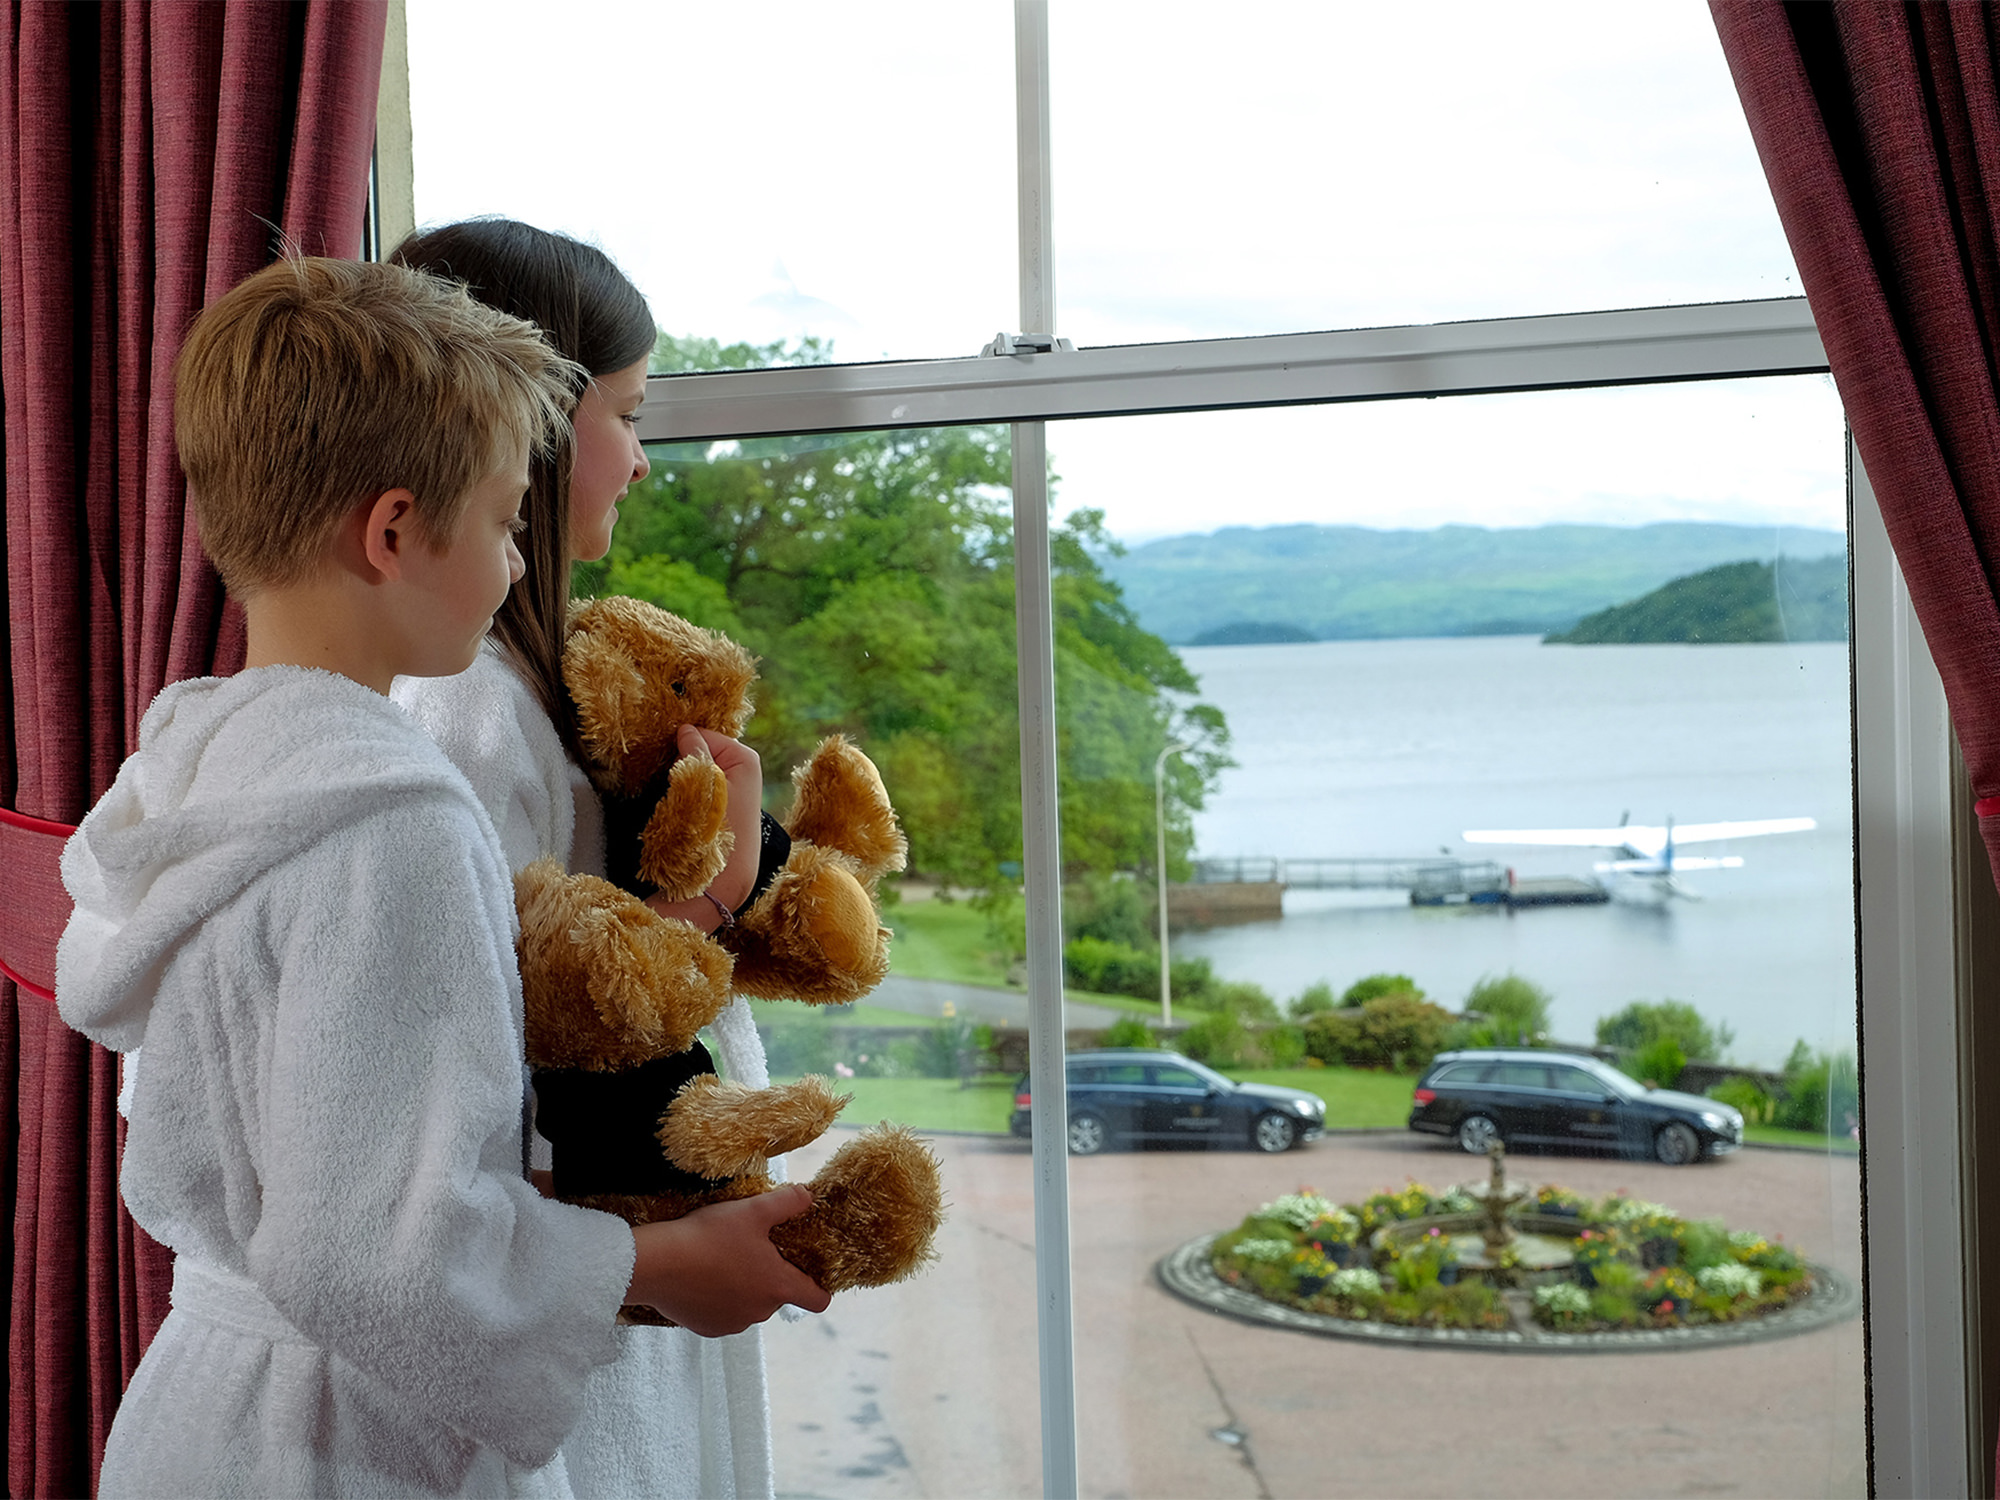 two kids holding teddy bears looking out a window at the water